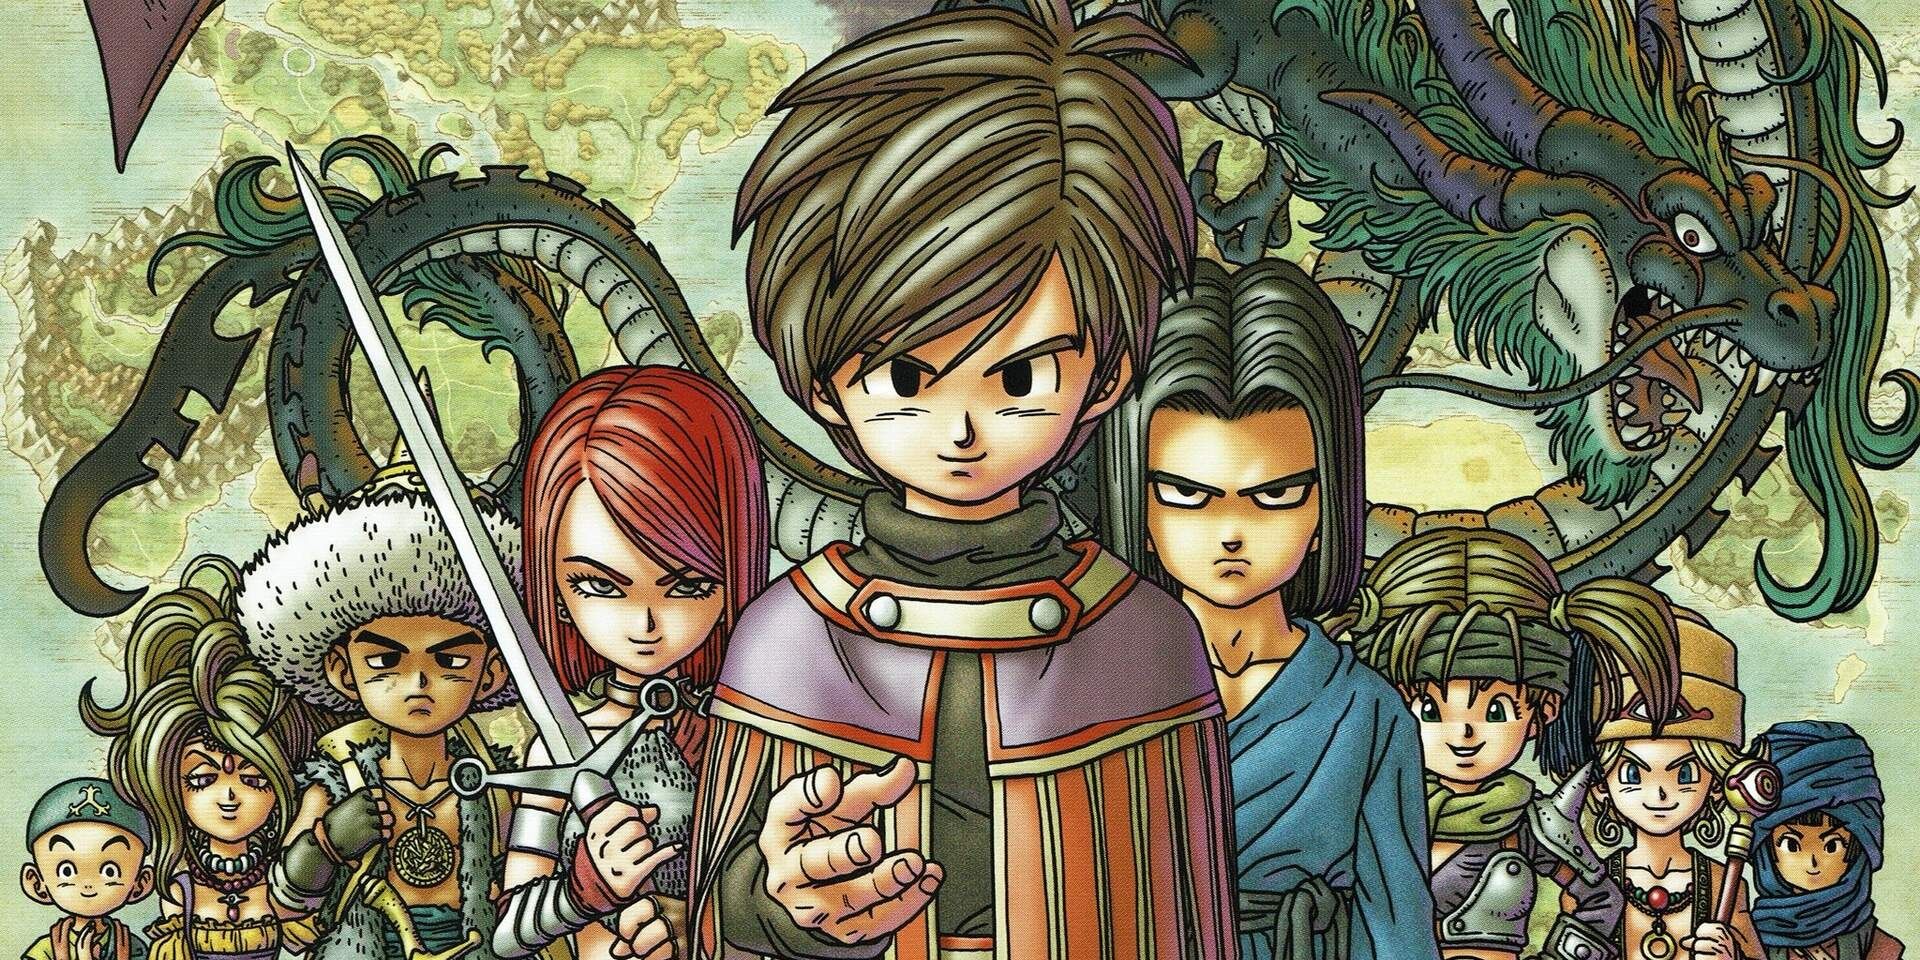 Cover art showing all the characters from Dragon Quest 9: Sentinels of the Starry Skies